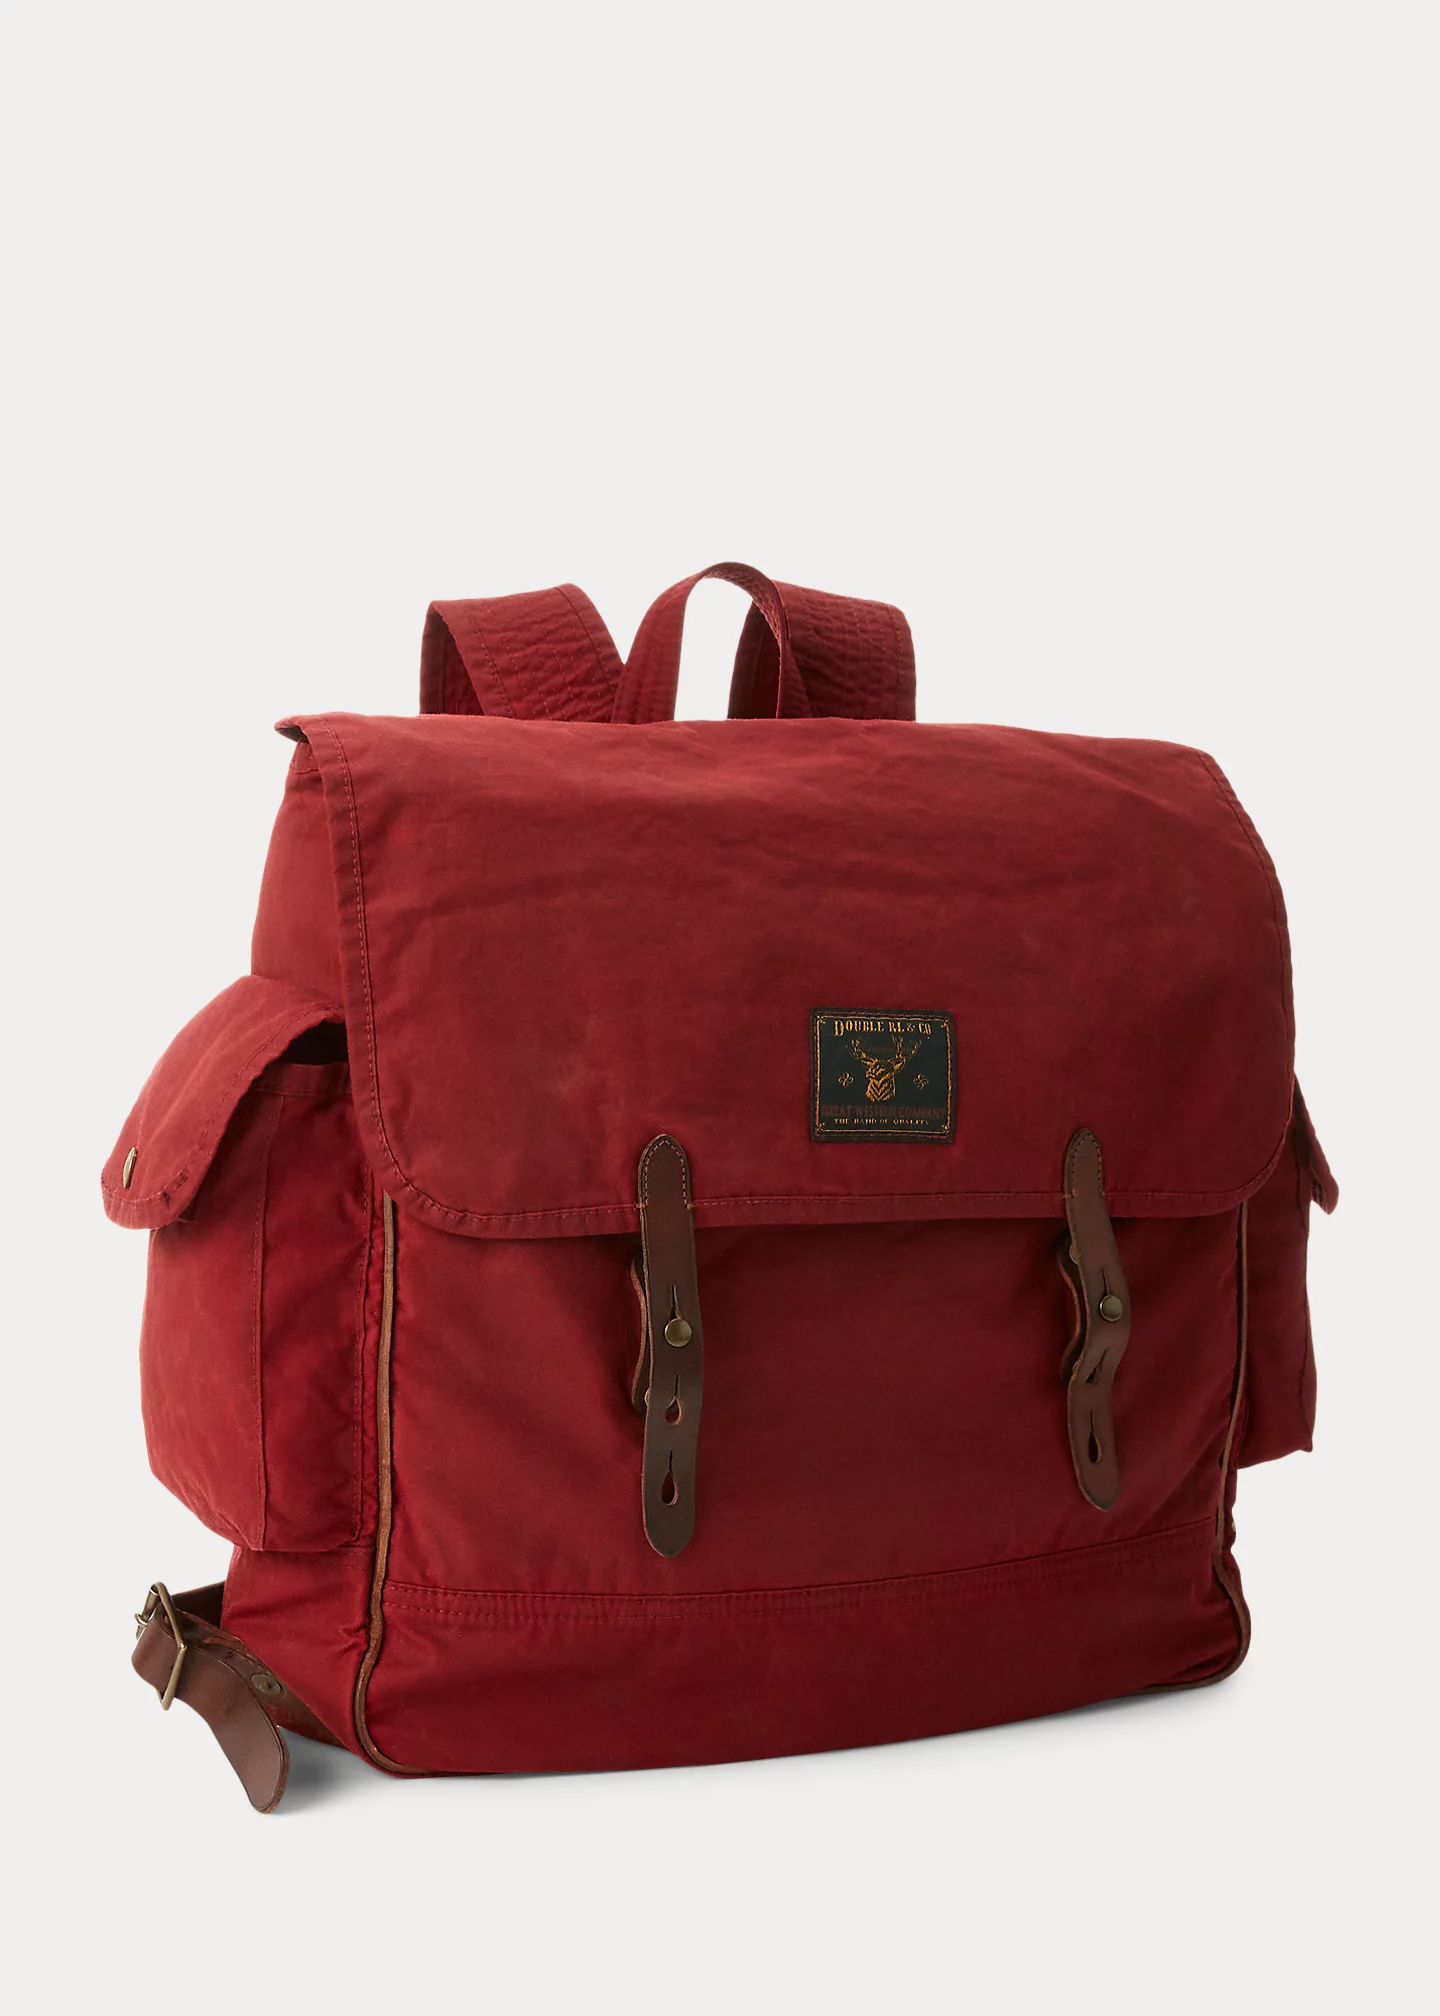 Brand bag Leather-Trim Oilcloth Backpack-,$78.43-0